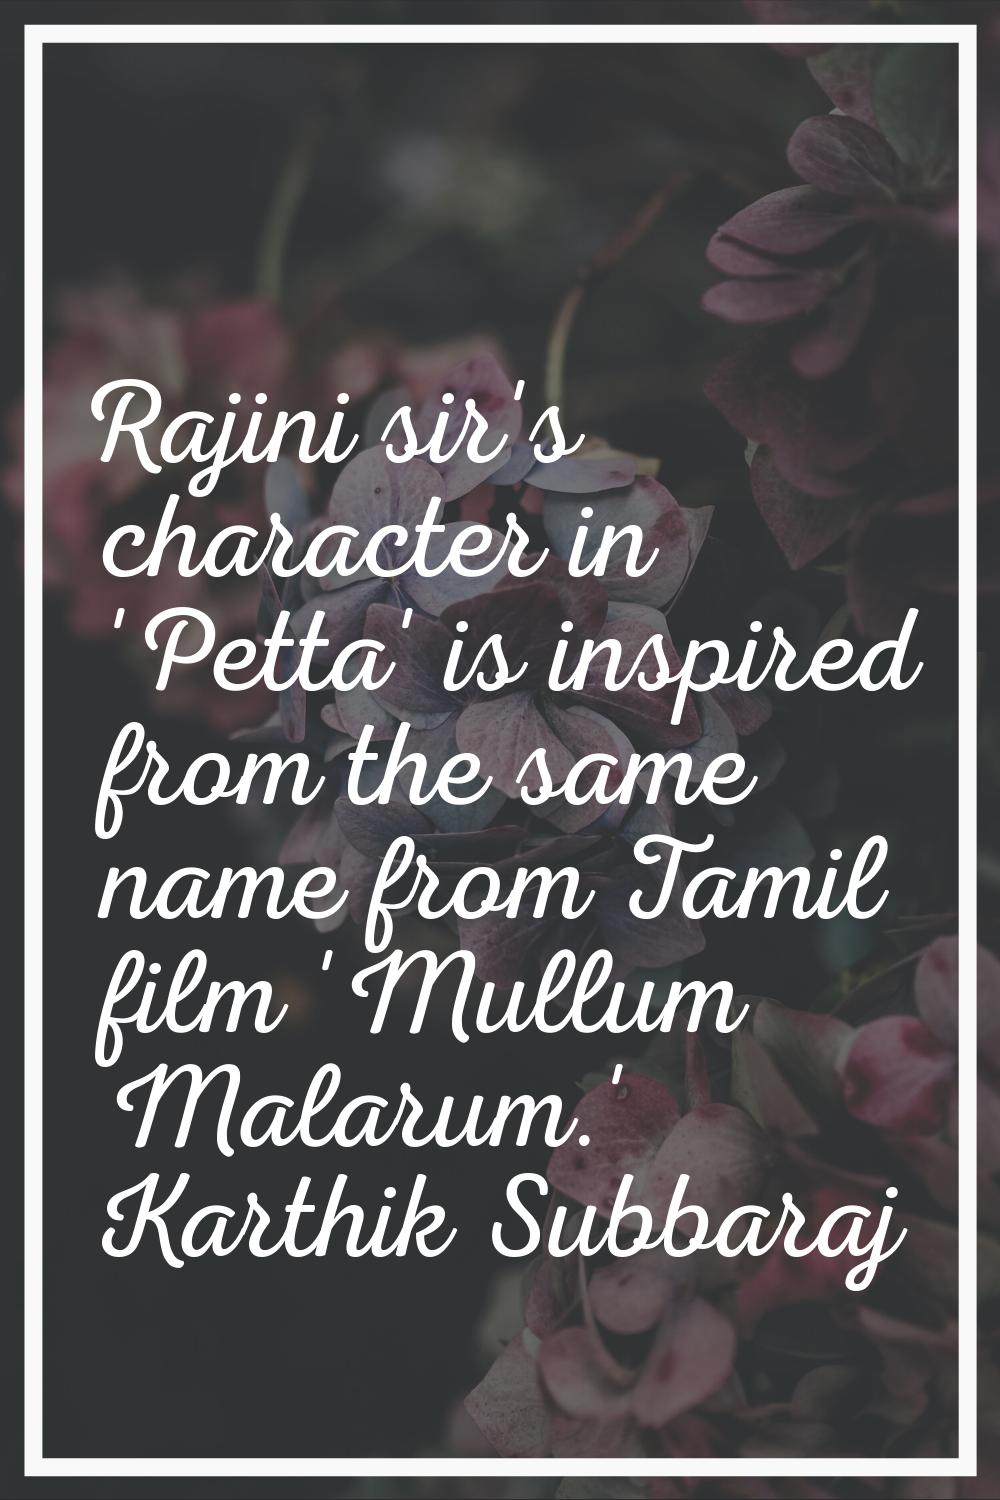 Rajini sir's character in 'Petta' is inspired from the same name from Tamil film 'Mullum Malarum.'